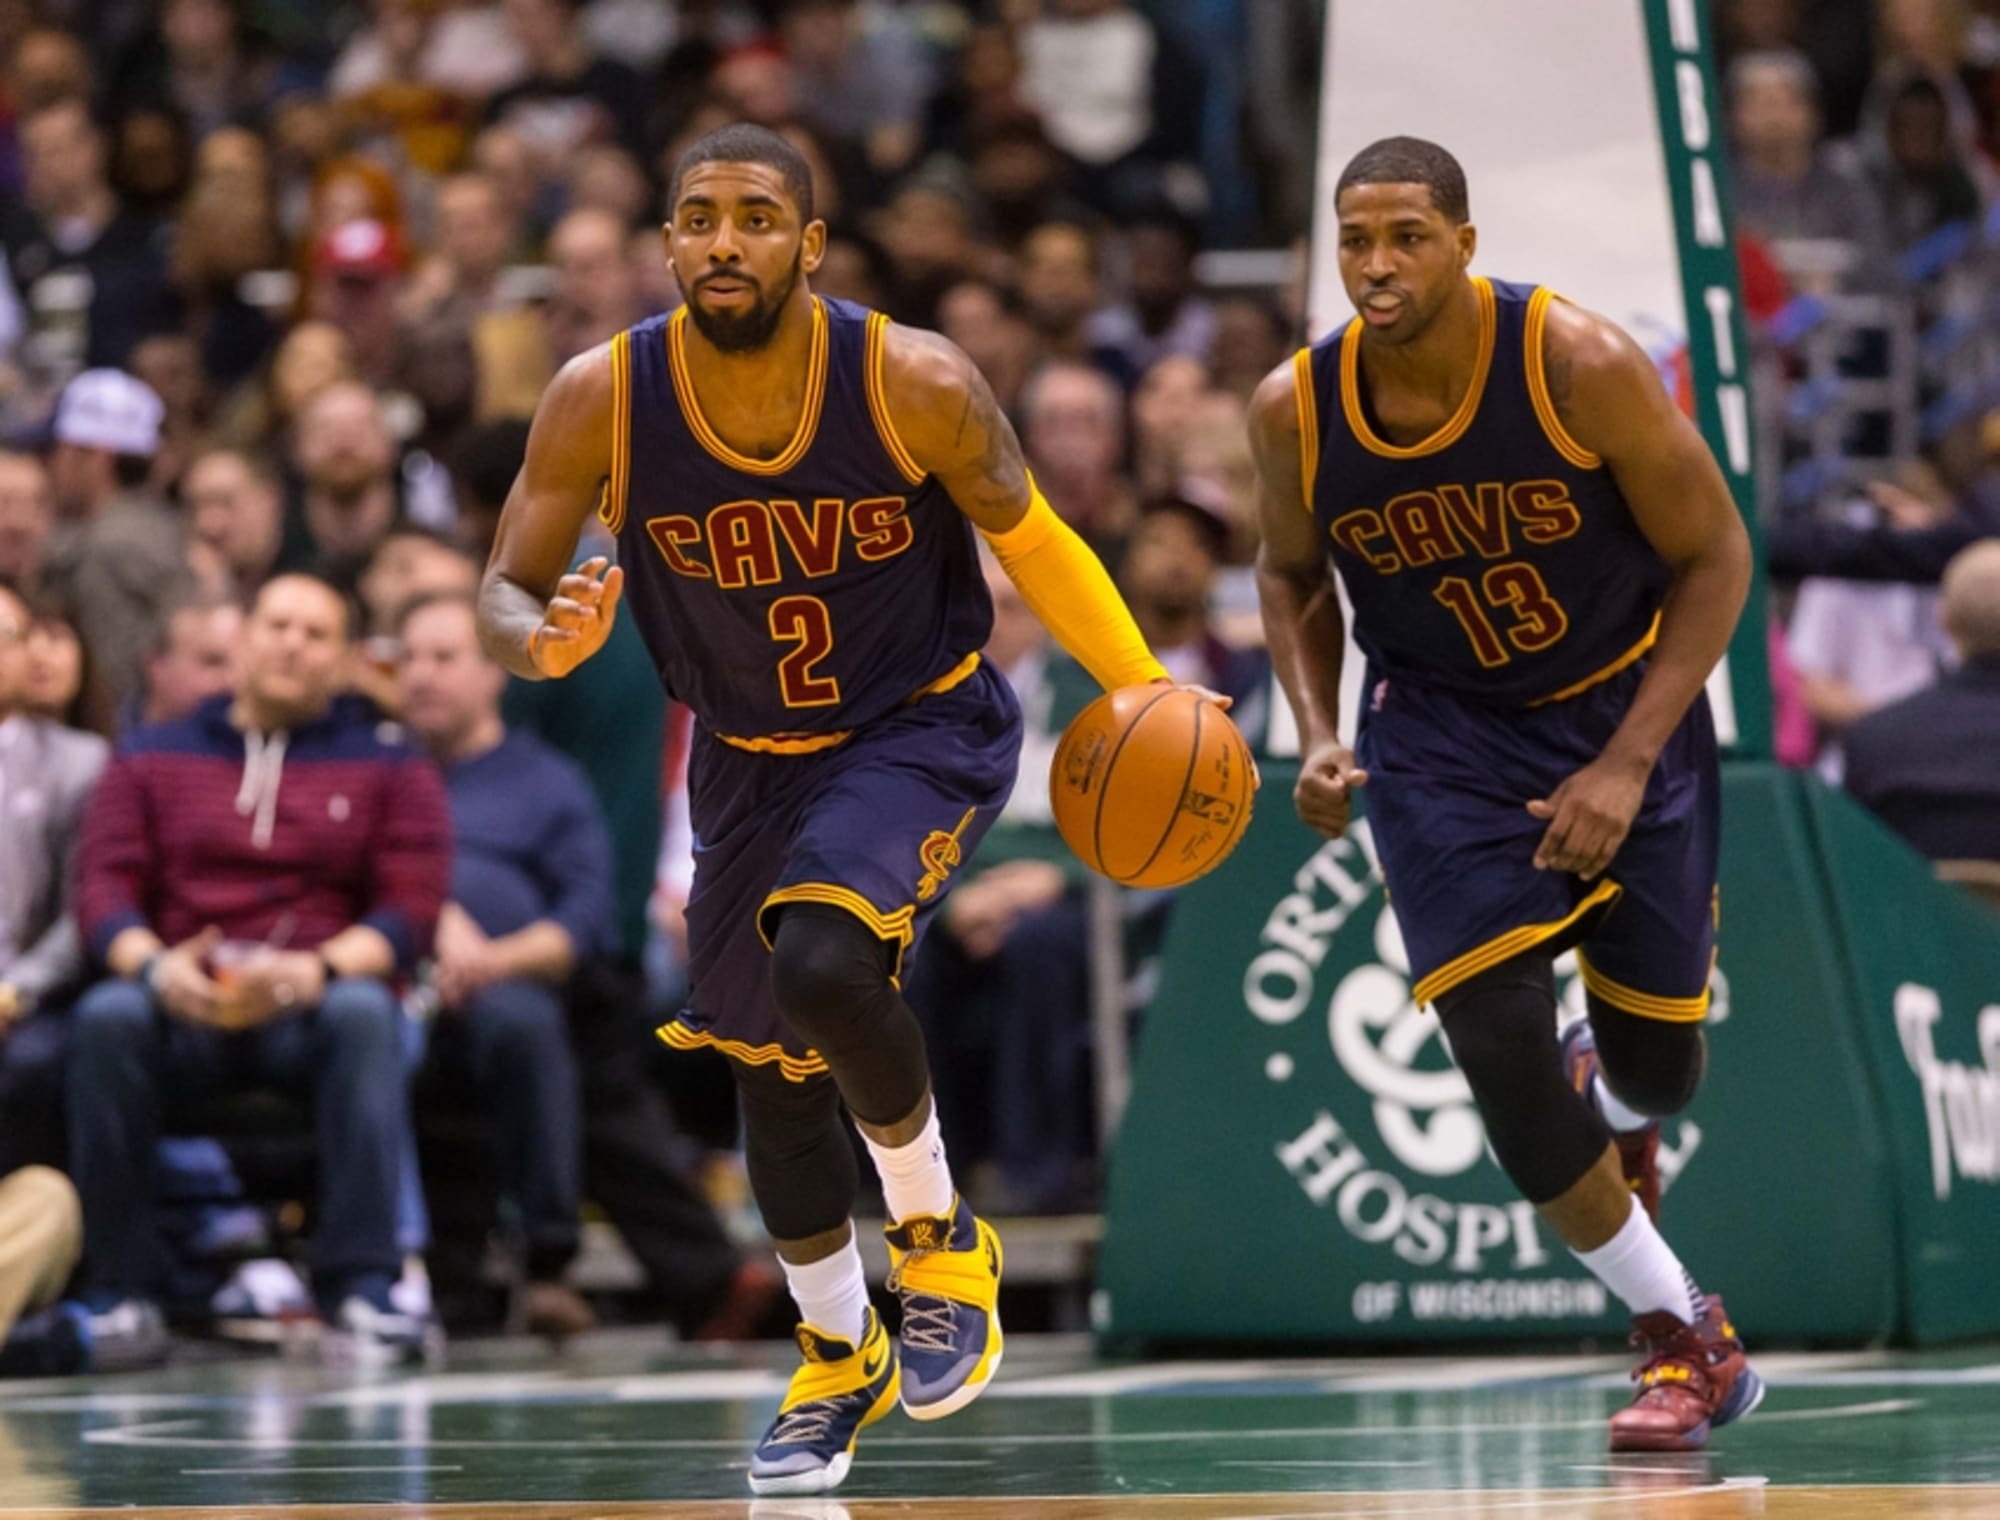 Duke Blue Devils In The NBA Playoffs - Kyrie, Cavs To The Finals